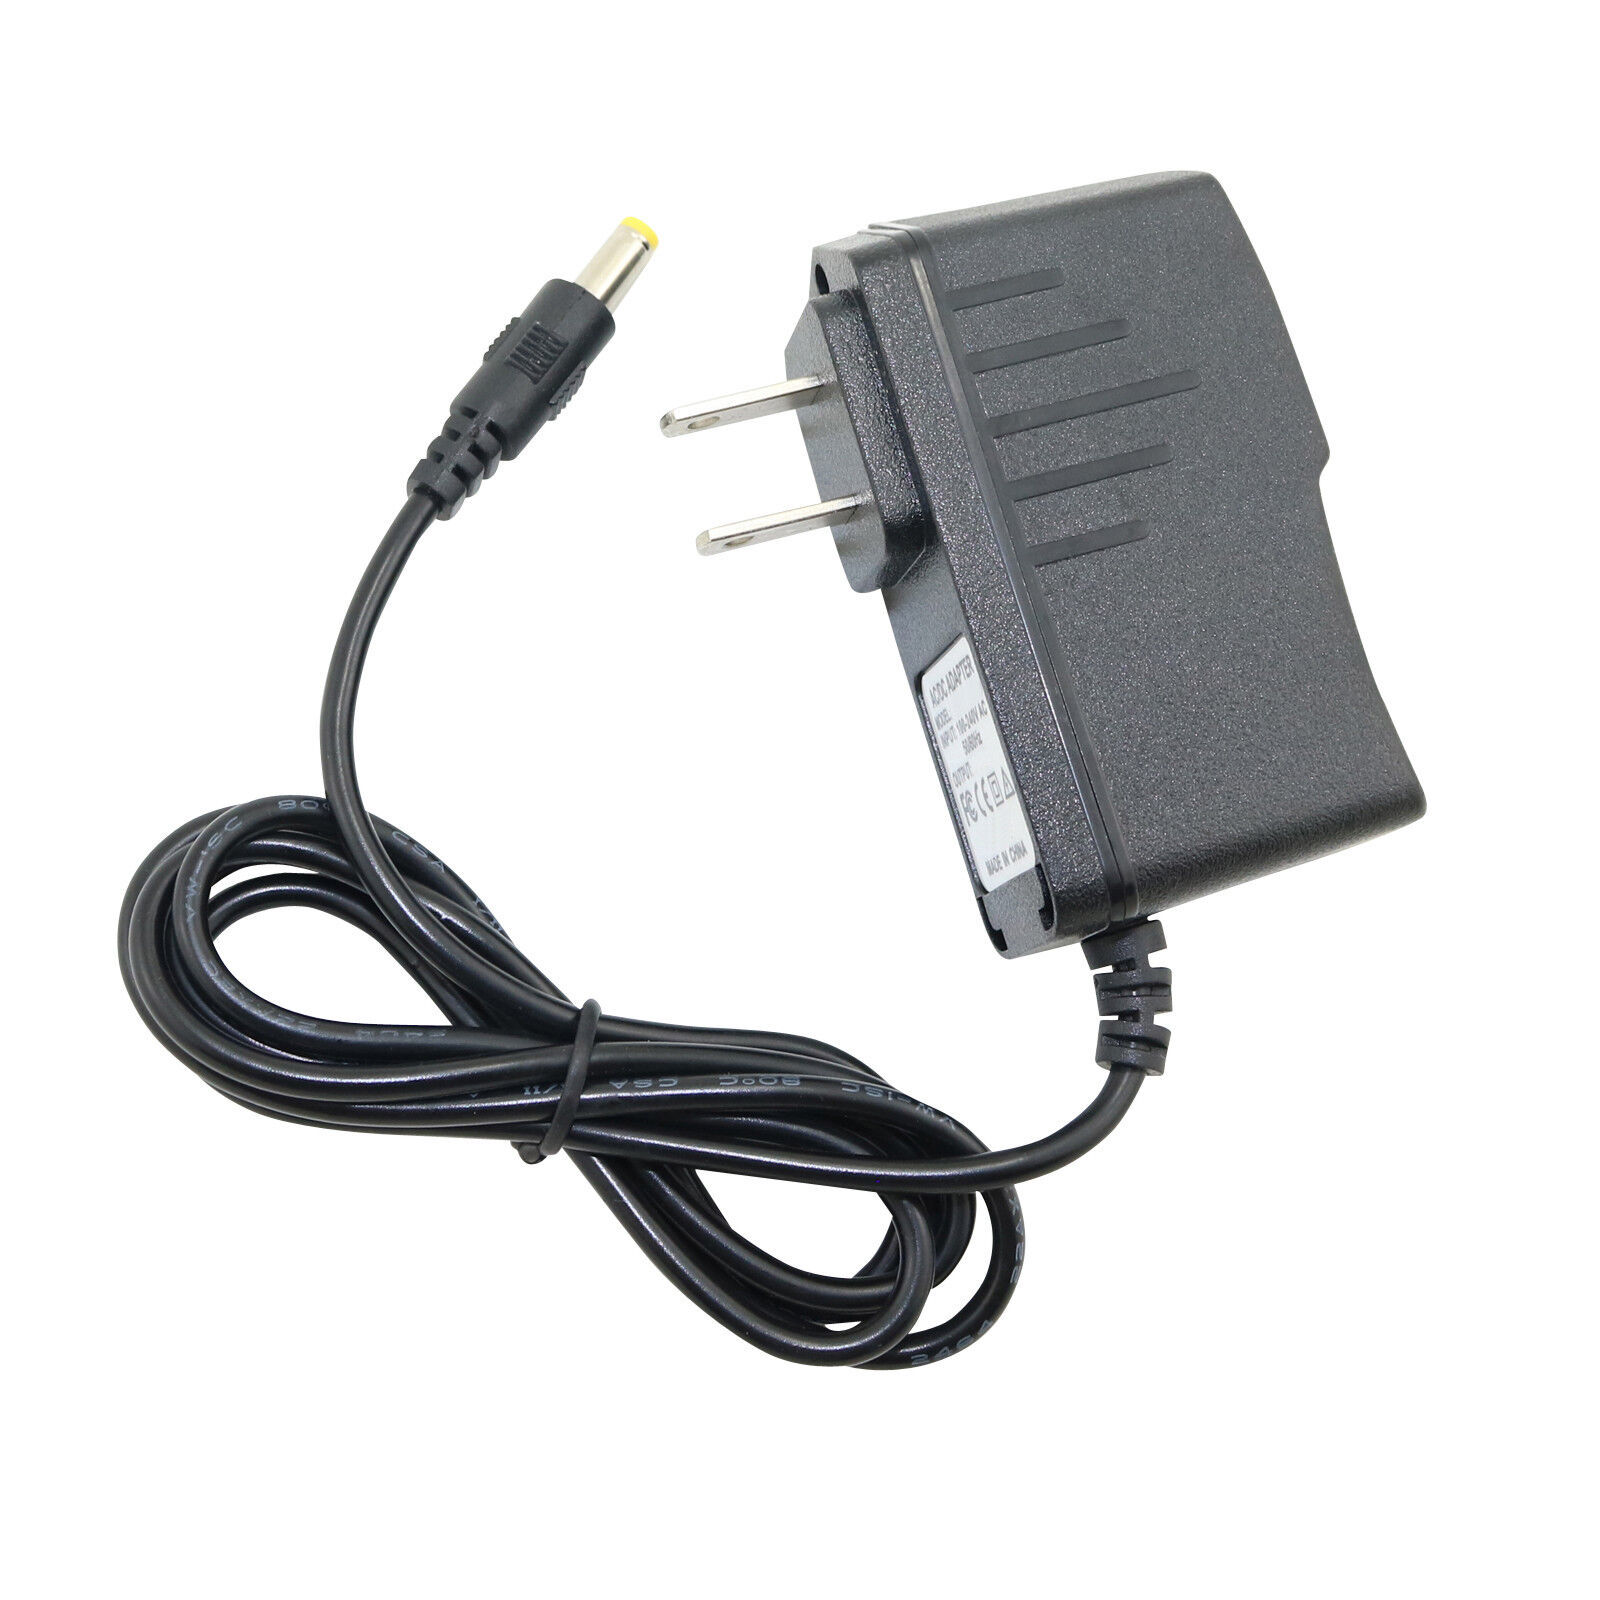 Primary image for Ac Adapter Charger Cord For Linksys Pap2 Pap2T Spa3000 Spa1001 Power Supply